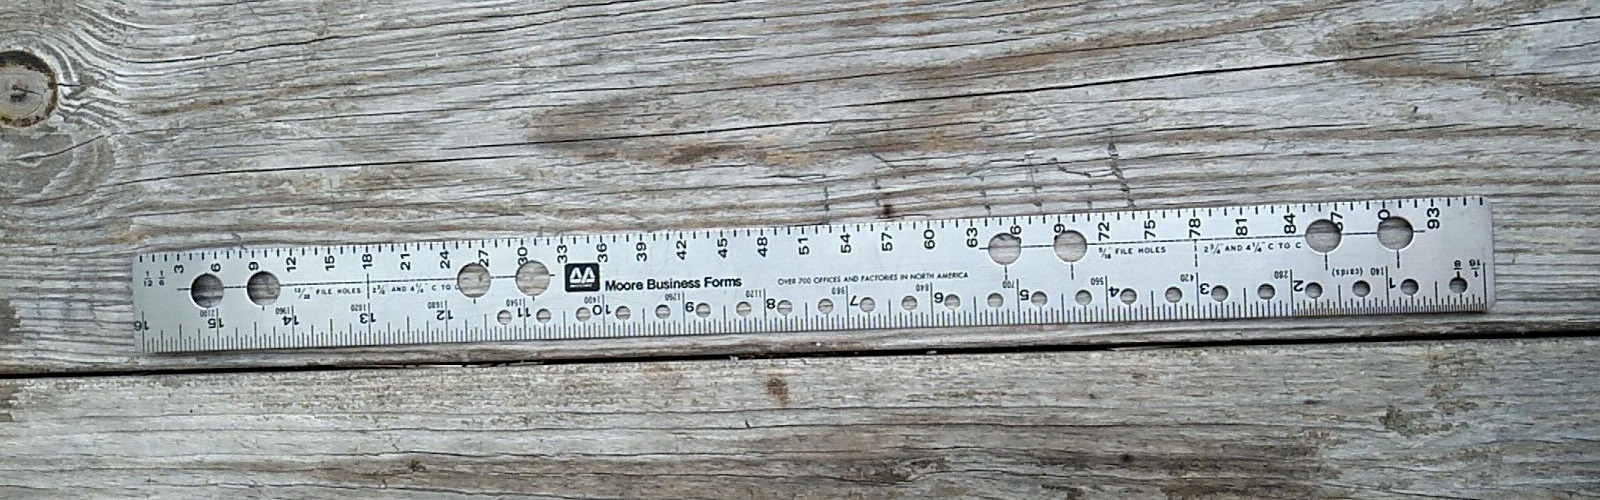 Moore Business Forms 16 Inch 2-Sided Business Form Printing Typeset Metal Ruler